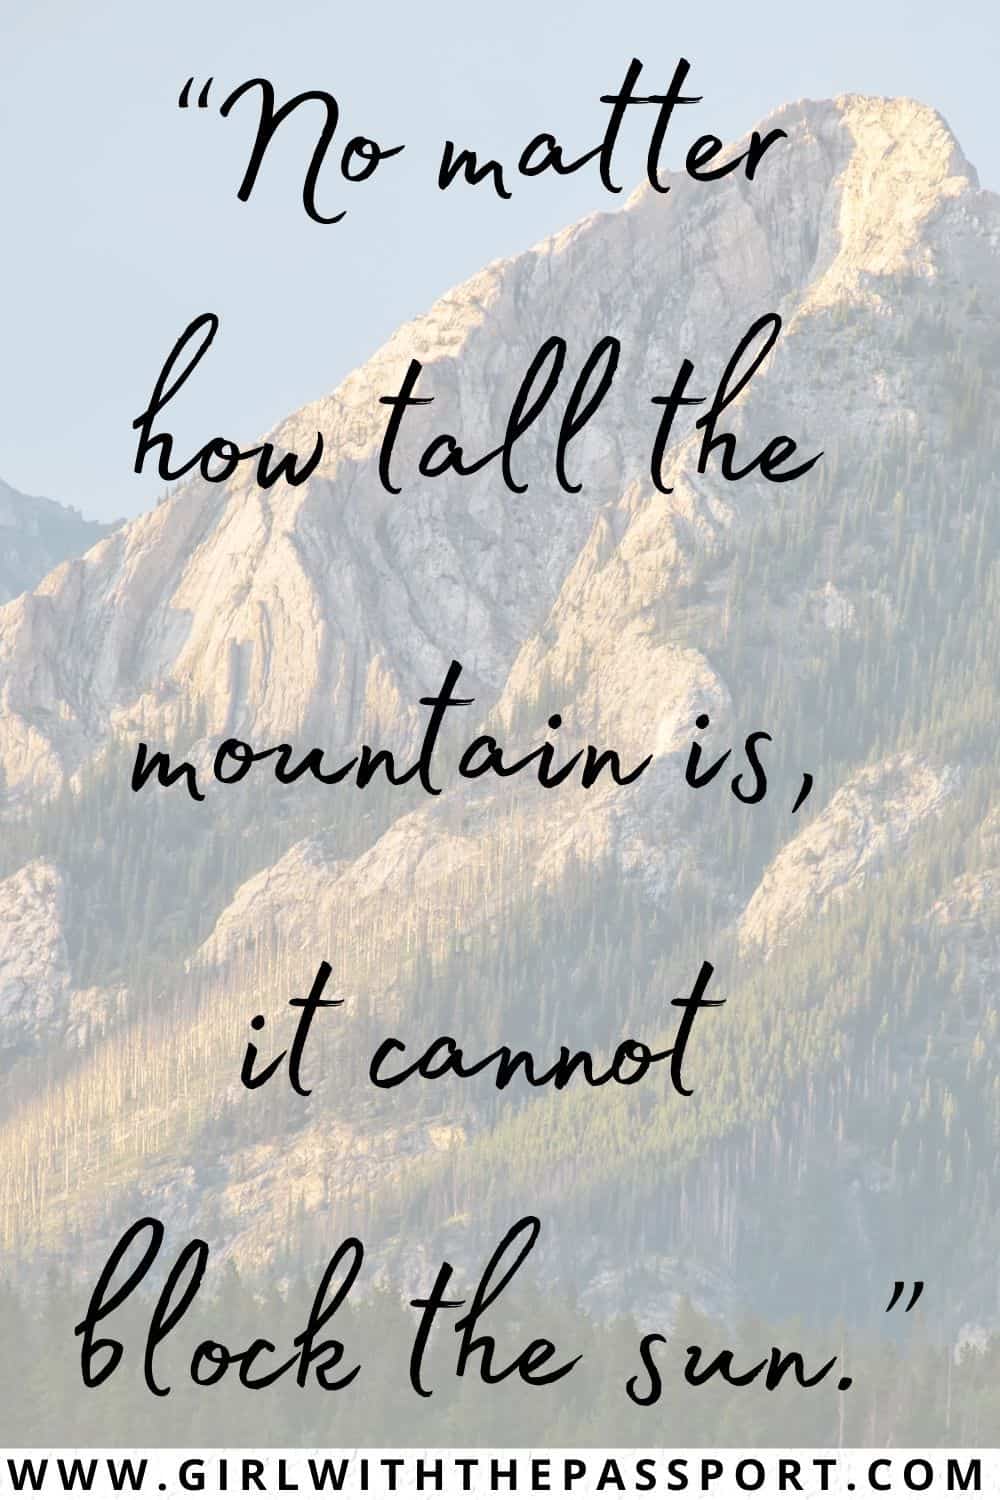 Best Mountaineering Quotes and Quotes about Mountaineering. 